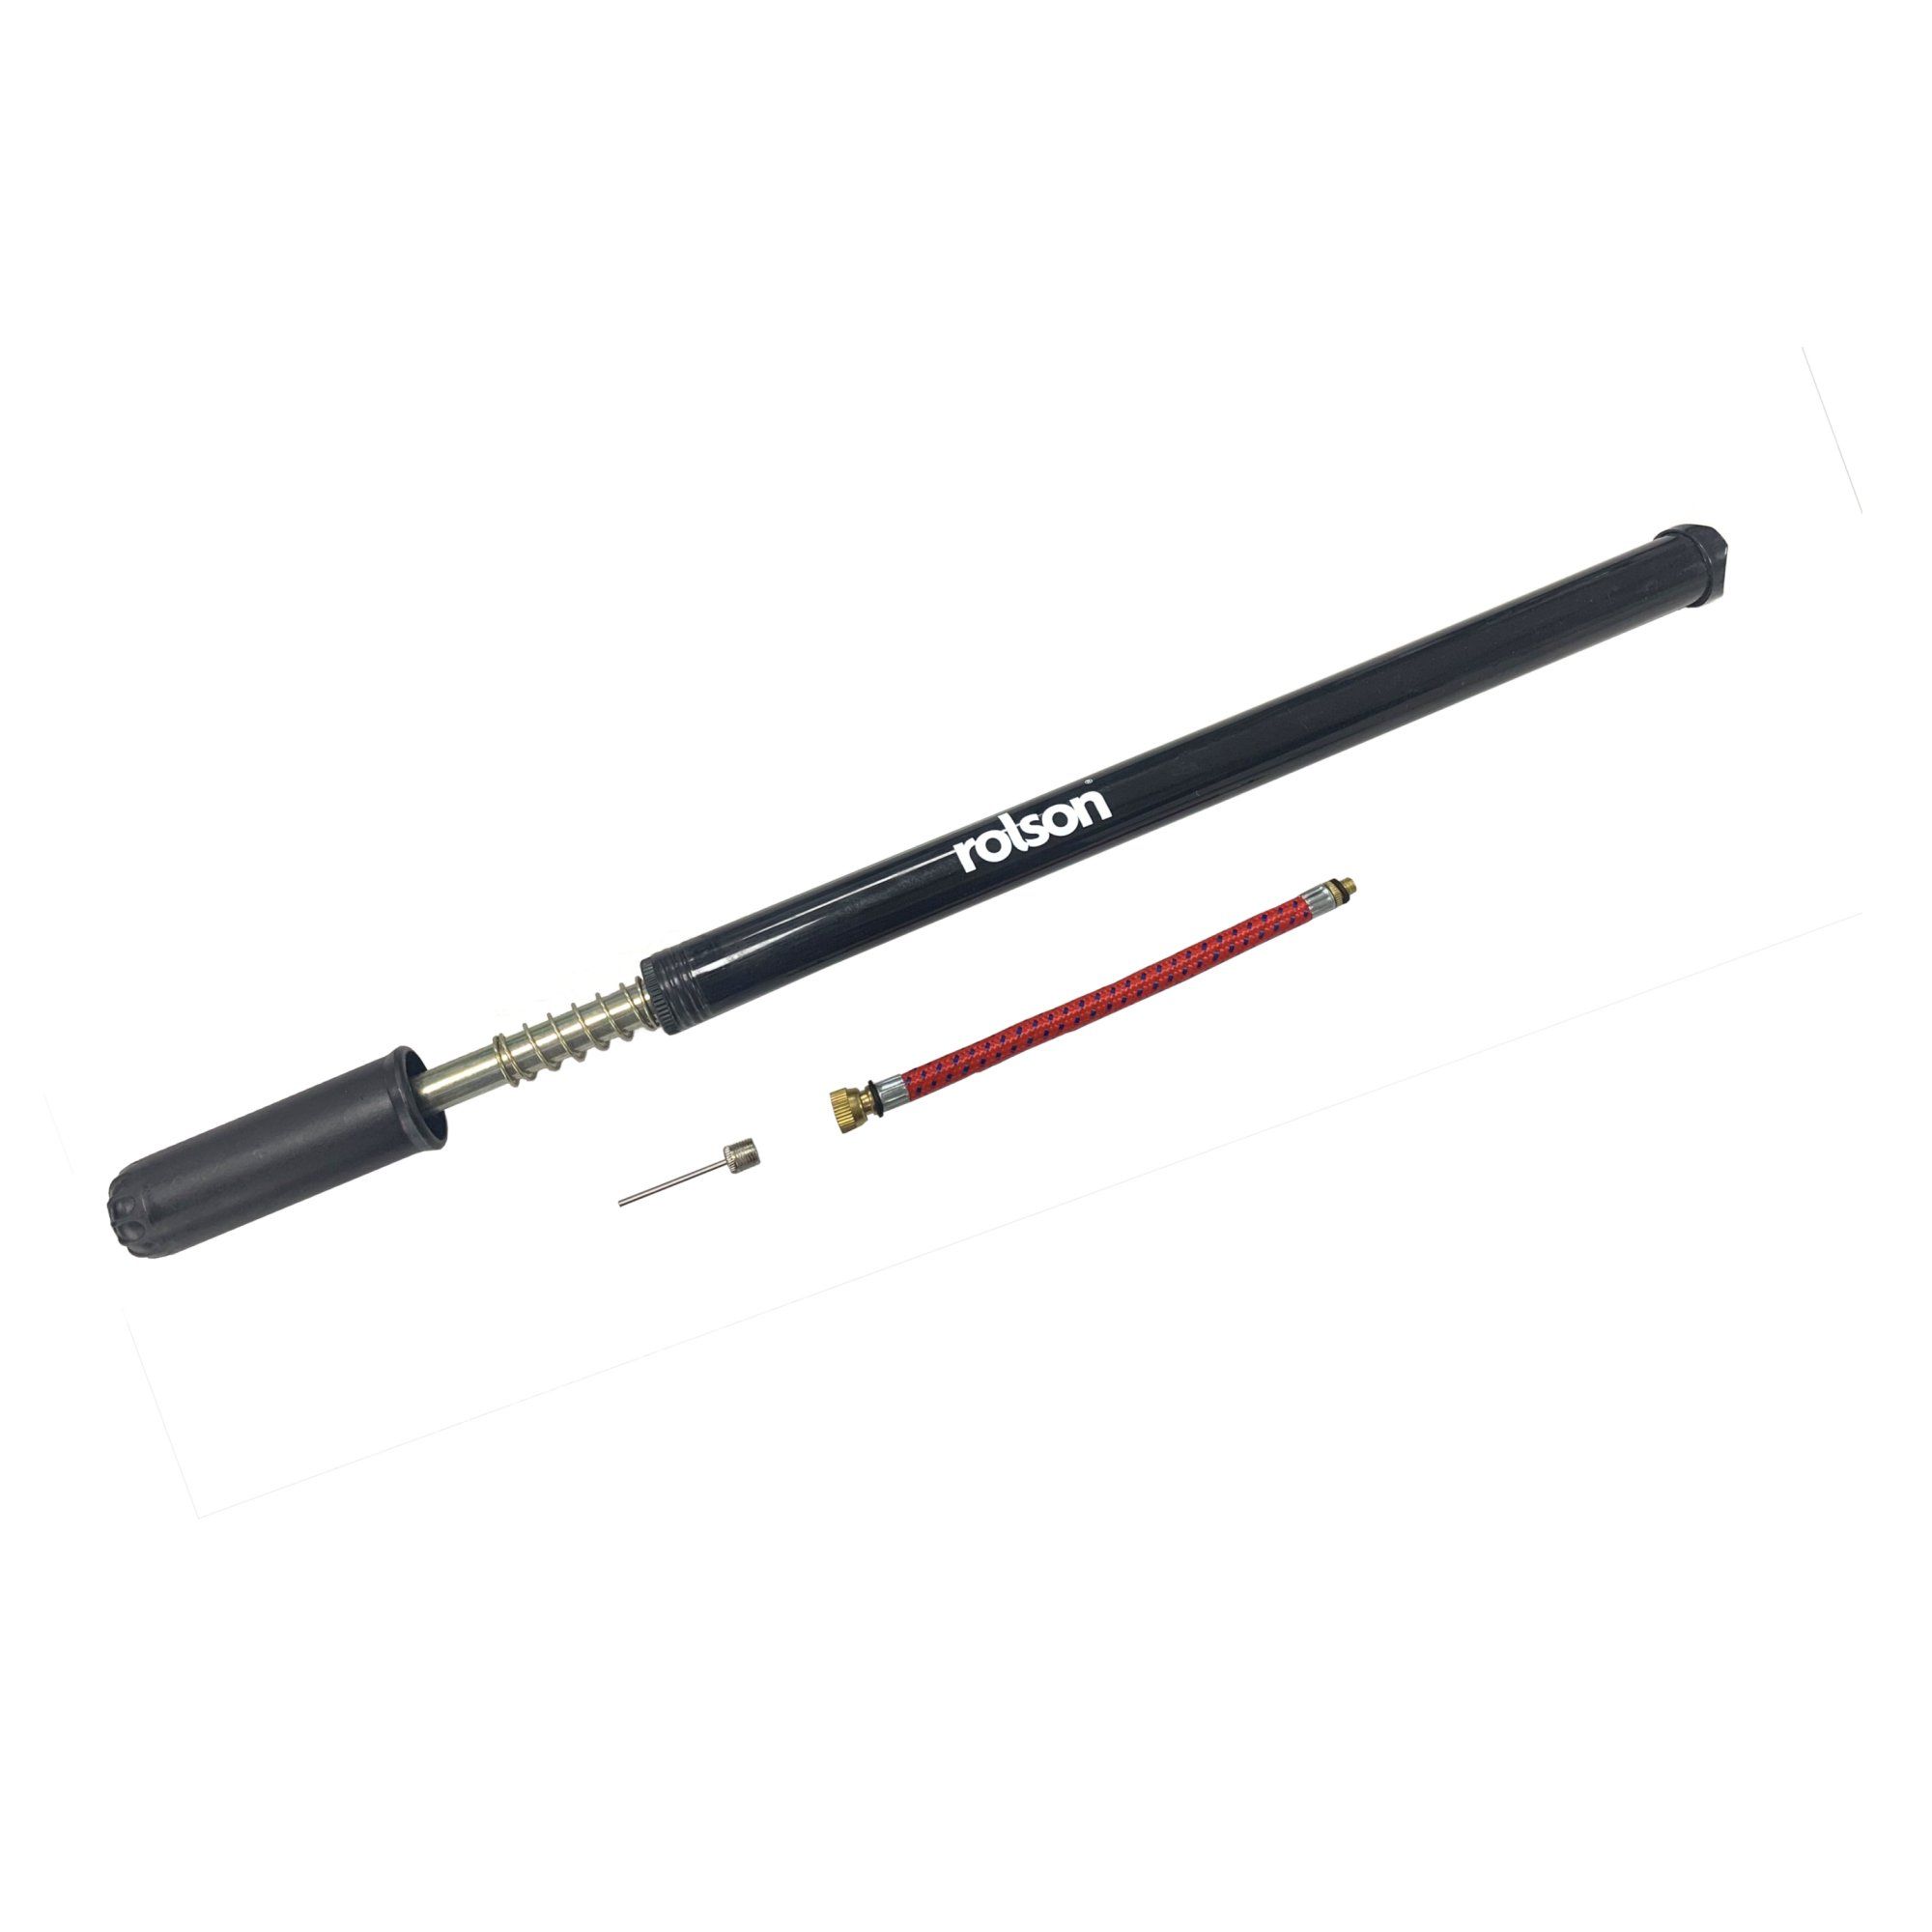 Traditional Bike Pump with Schrader valve and needle adaptor 42960. Length  375mm ( 15inch ) great basic pump.